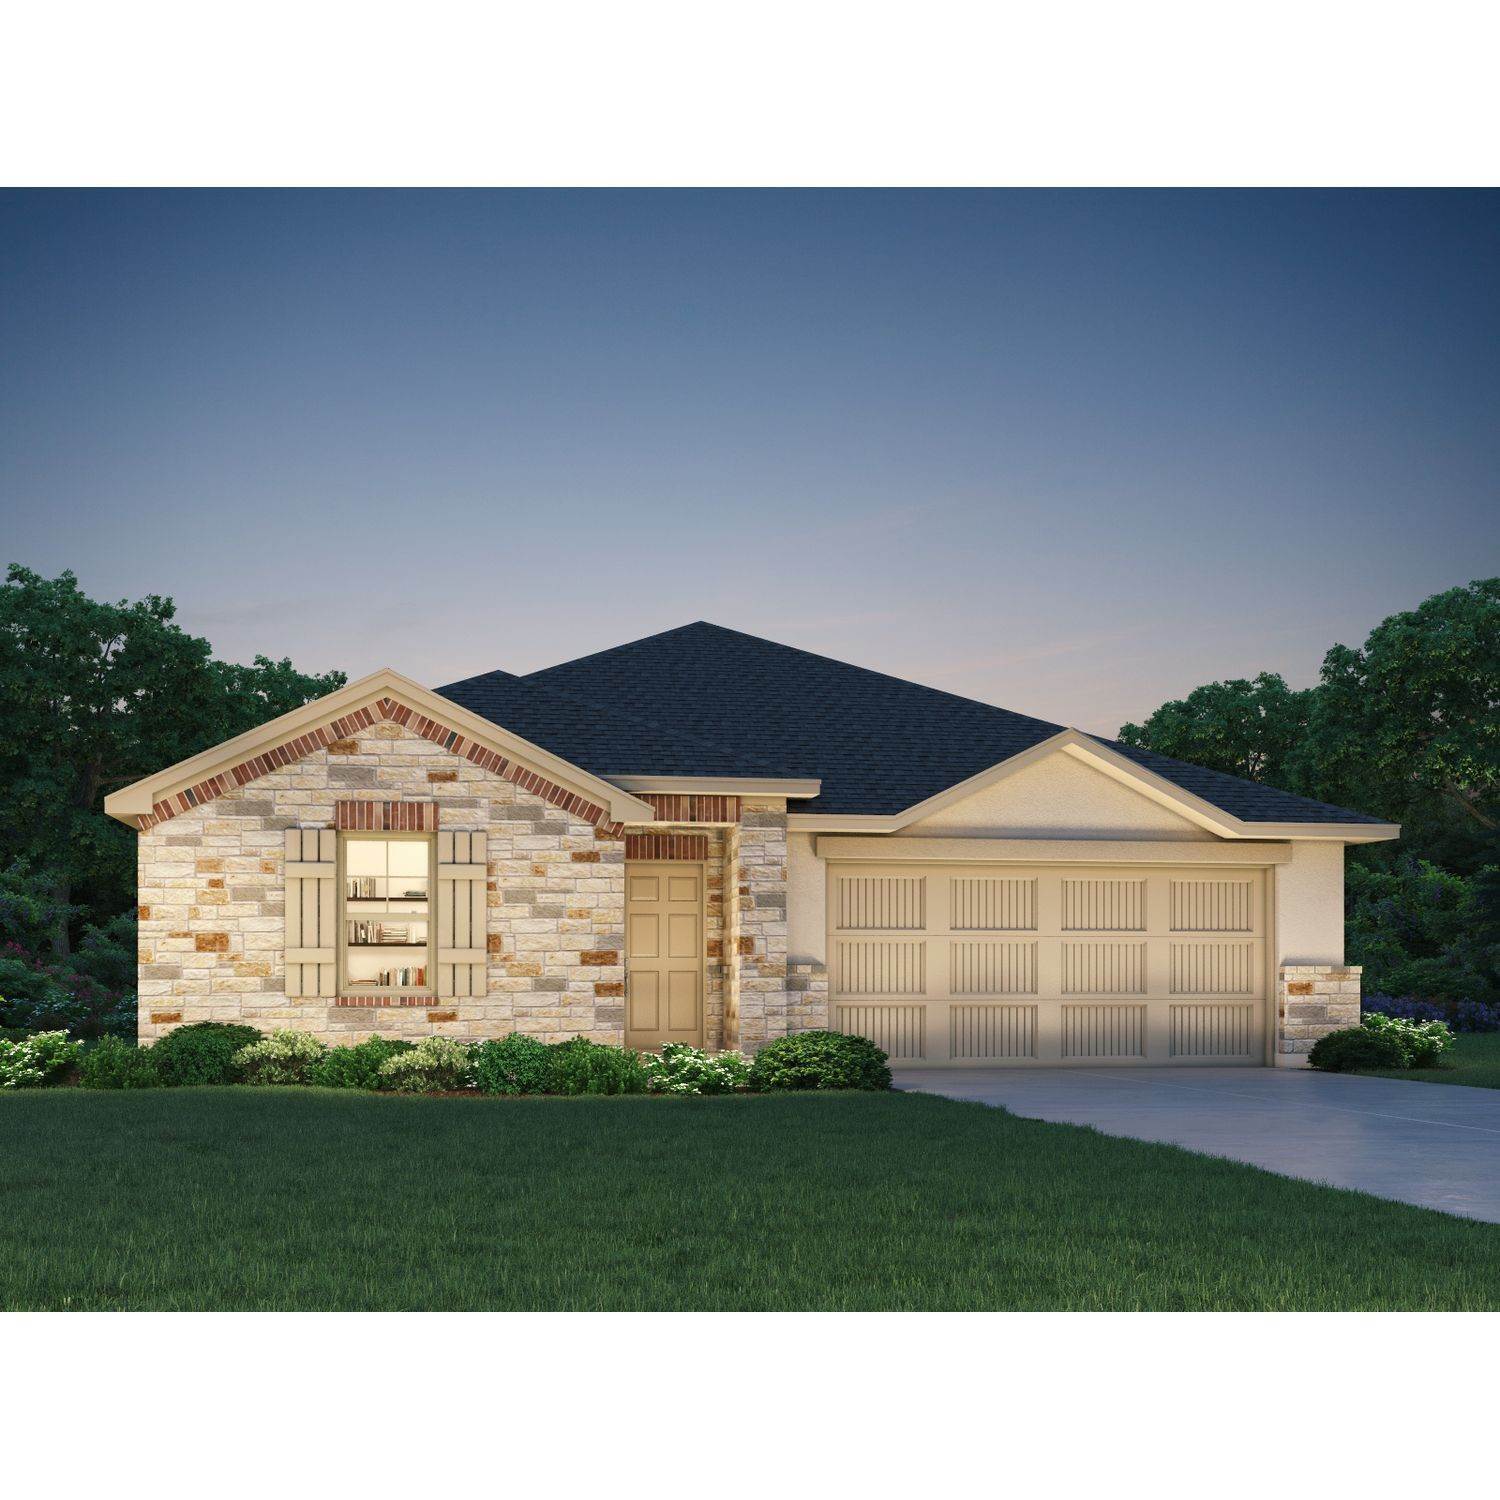 Single Family for Sale at Manor, TX 78653